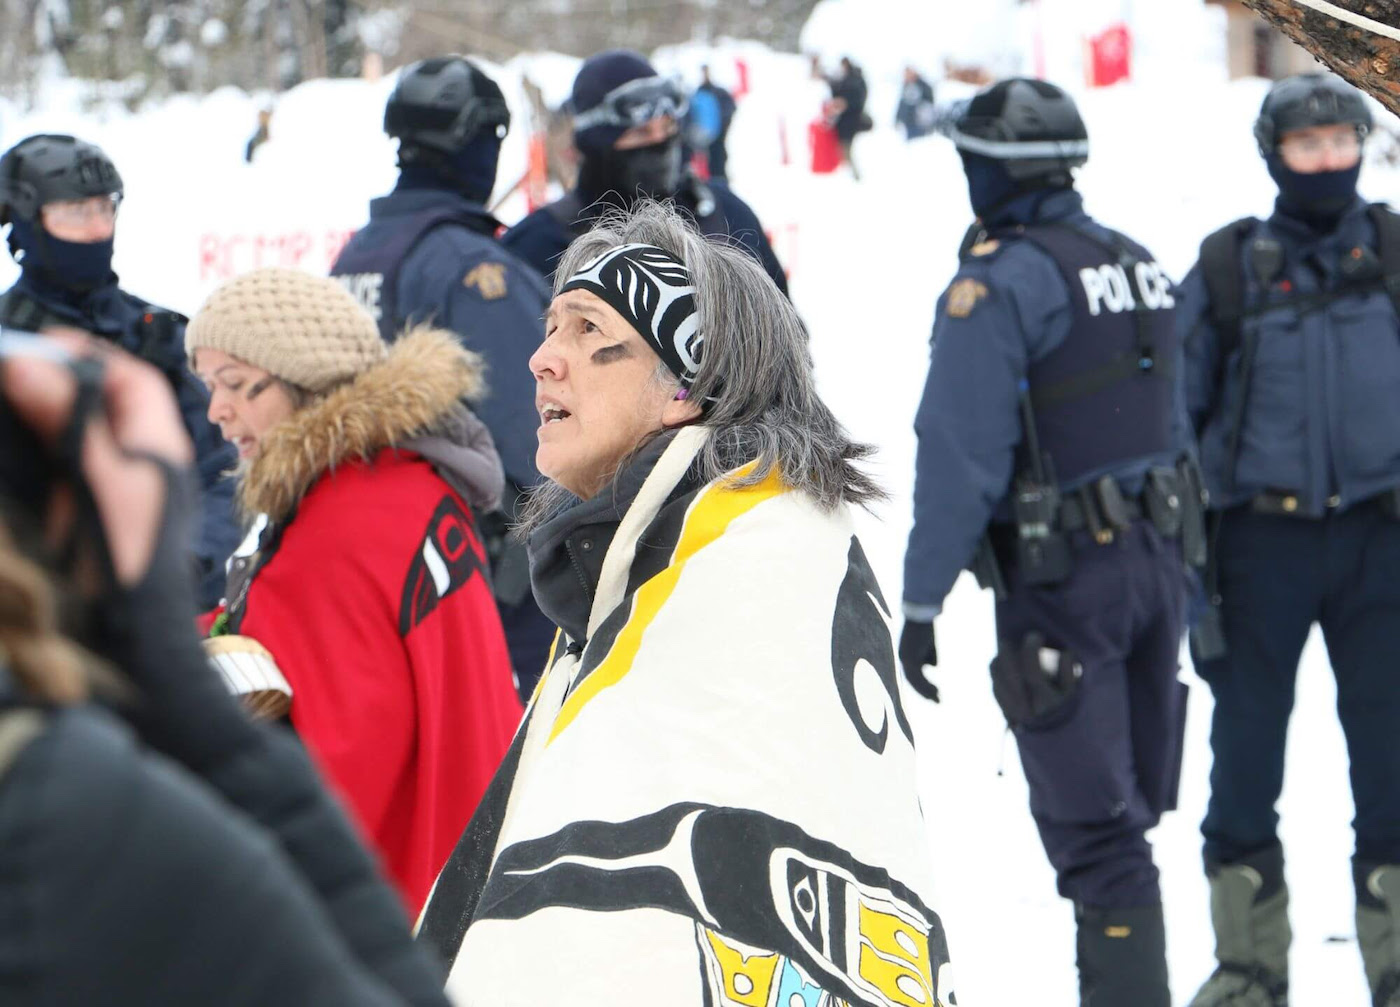 At a protest against British Columbia’s Coastal GasLink pipeline project in February, Freda Huson, a hereditary chief of the Wet'suwut'en First Nation, was the last person singing by a sacred fire when she was arrested by police. The policy included tactical squad officers armed with rifles and handlers with dogs, arriving in a convoy of more than 30 vehicles as a helicopter circled overhead — An example of BC’s increasingly muscular protest takedowns.